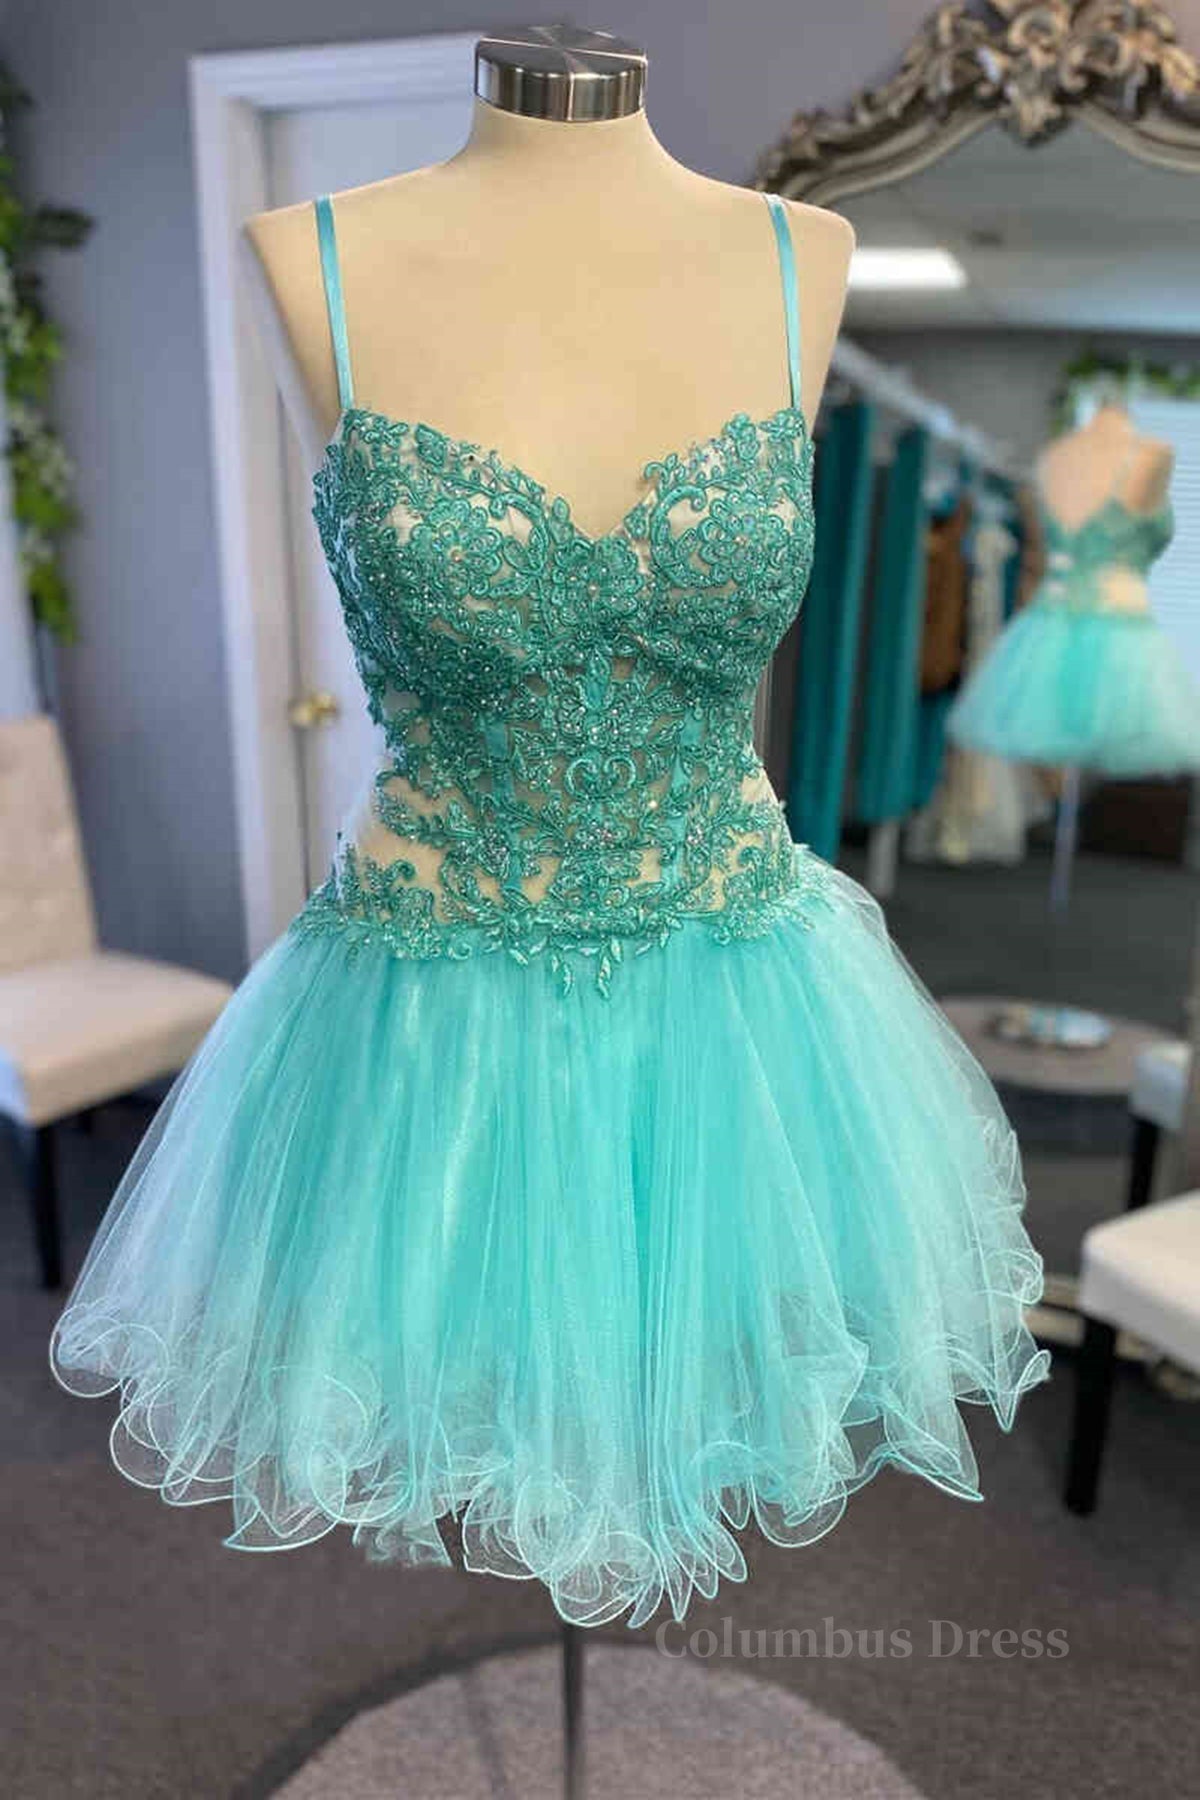 Short V Neck Mint Green Lace Corset Prom Dresses, Short Mint Green Lace Corset Formal Corset Homecoming Dresses outfit, Evening Dress Stunning